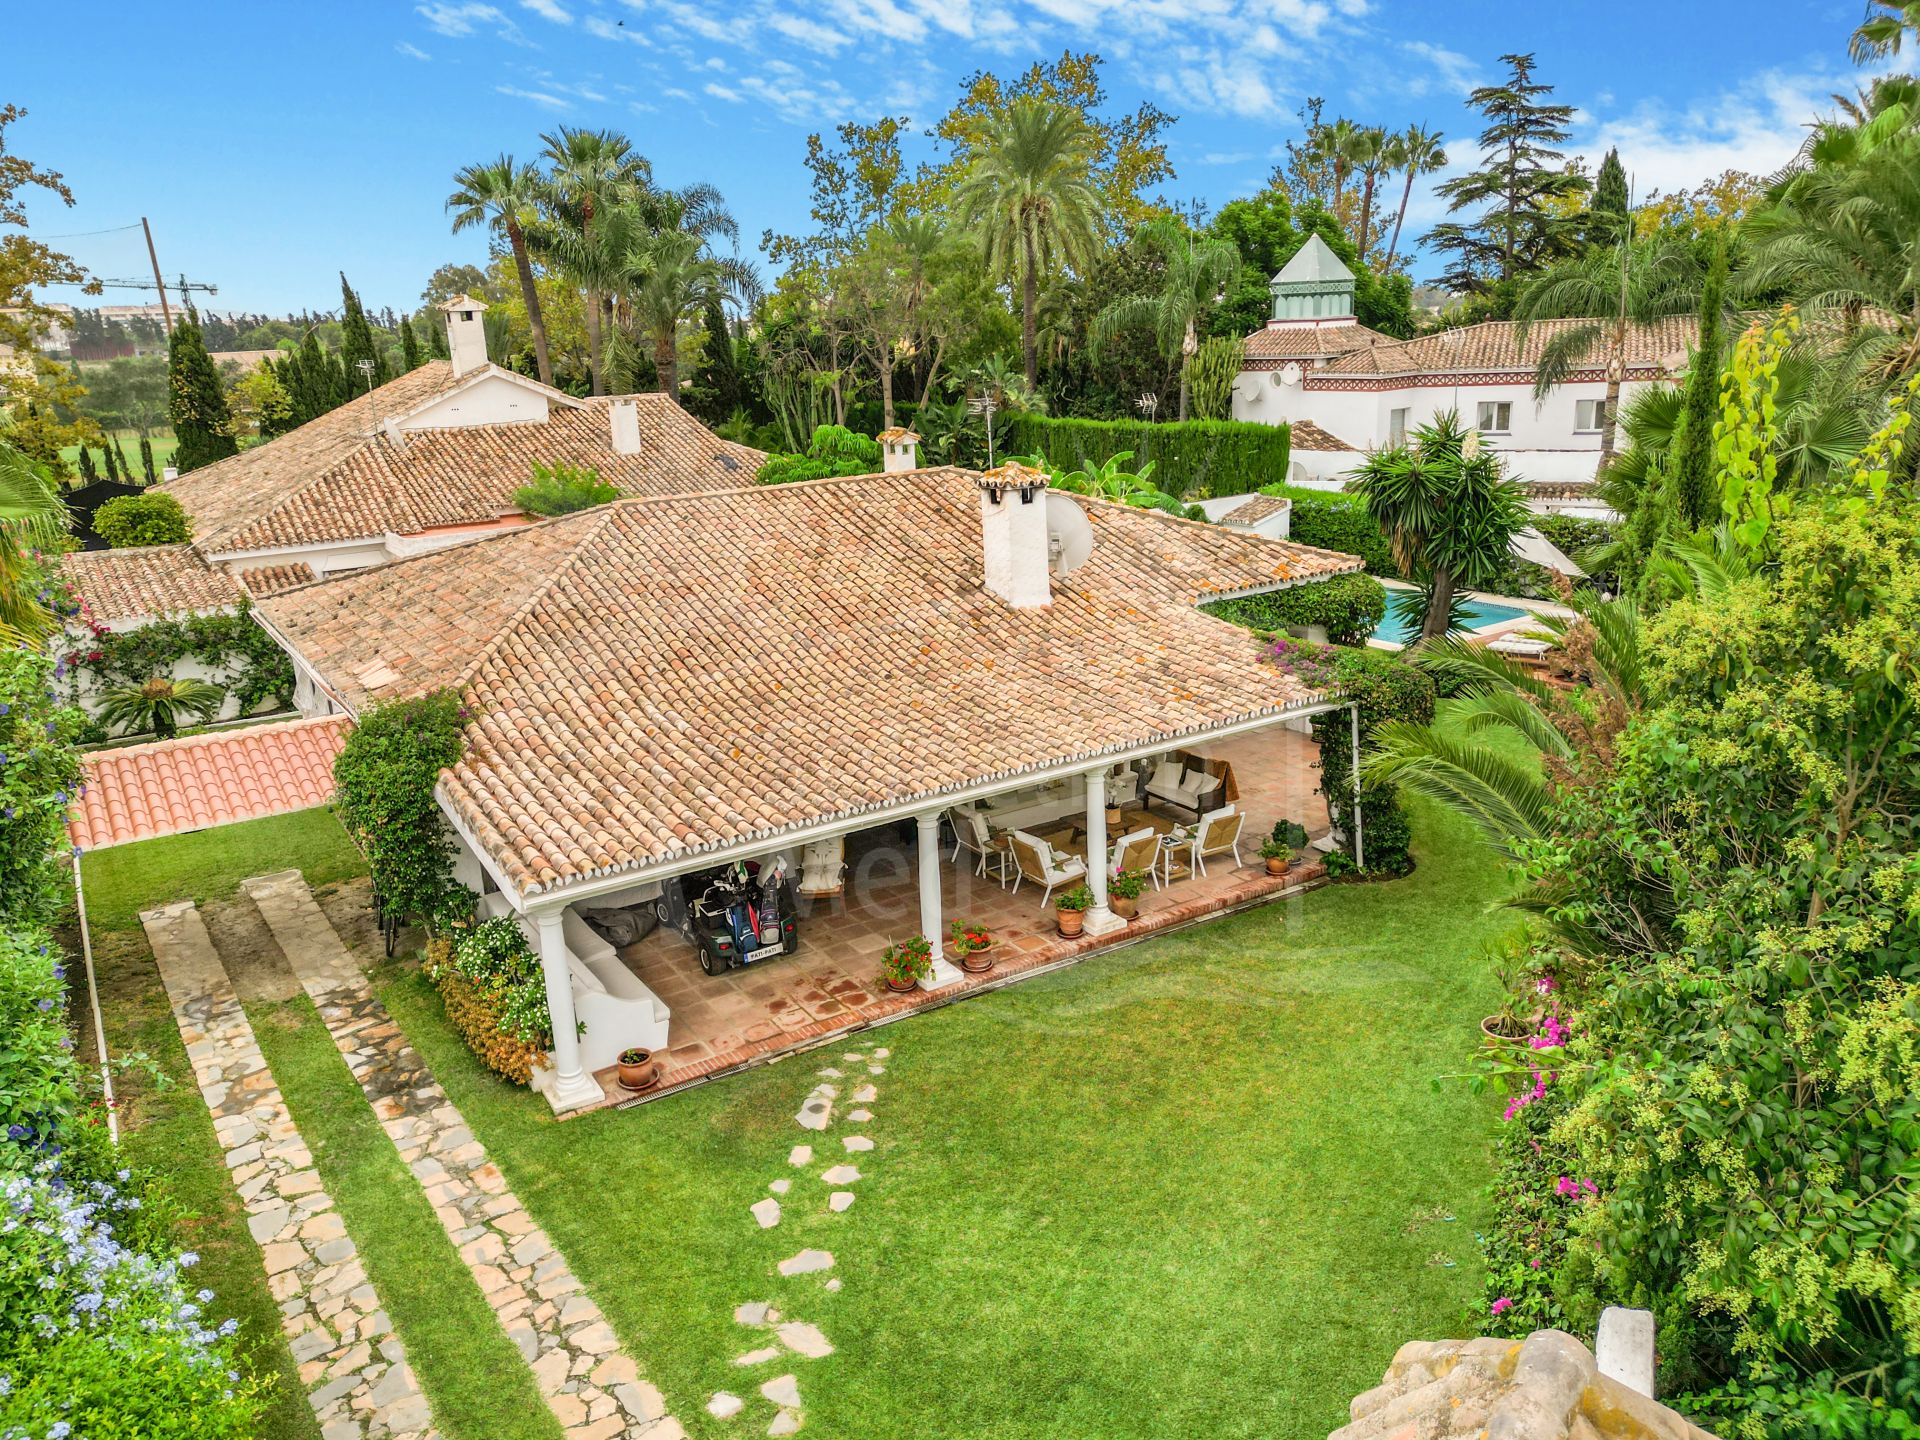 Charming four bedroom, southeast facing villa located in Guadalmina Alta with private pool and garden